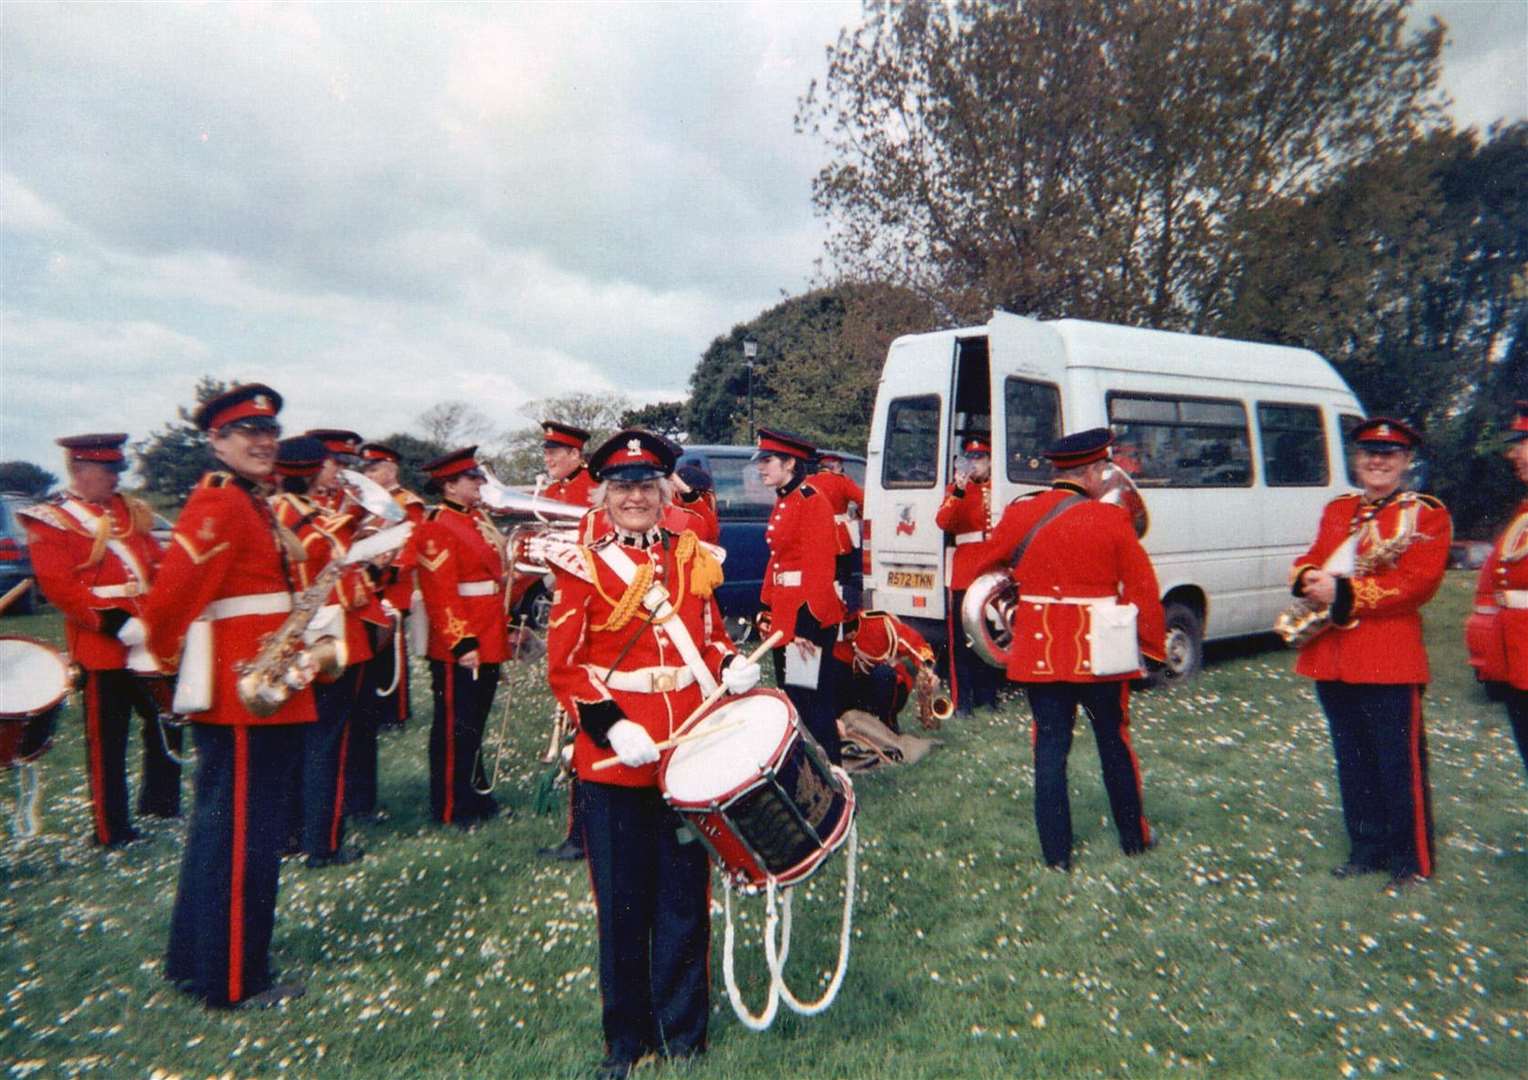 Pauline Polhill was part of the Wessex Military Band (Family handout/PA)